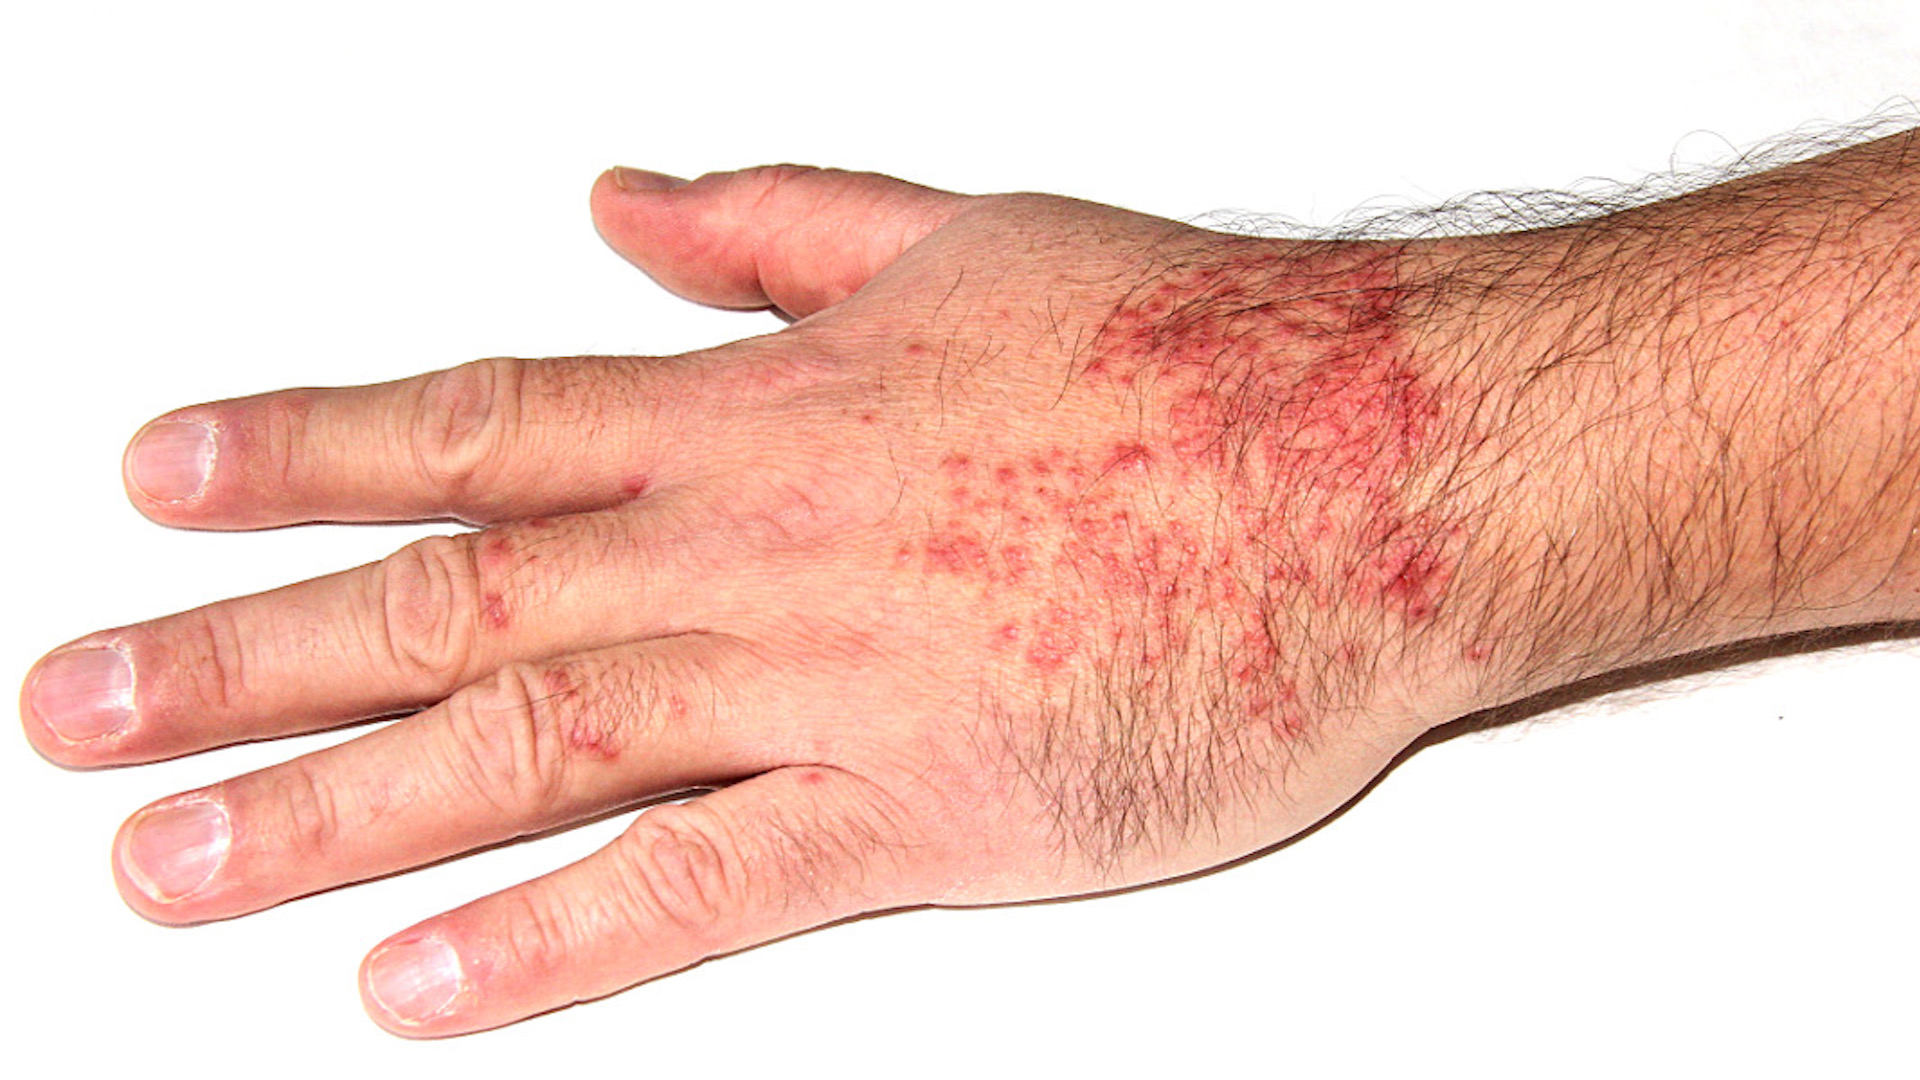 A photograph of a white man's hand with a dark red rash